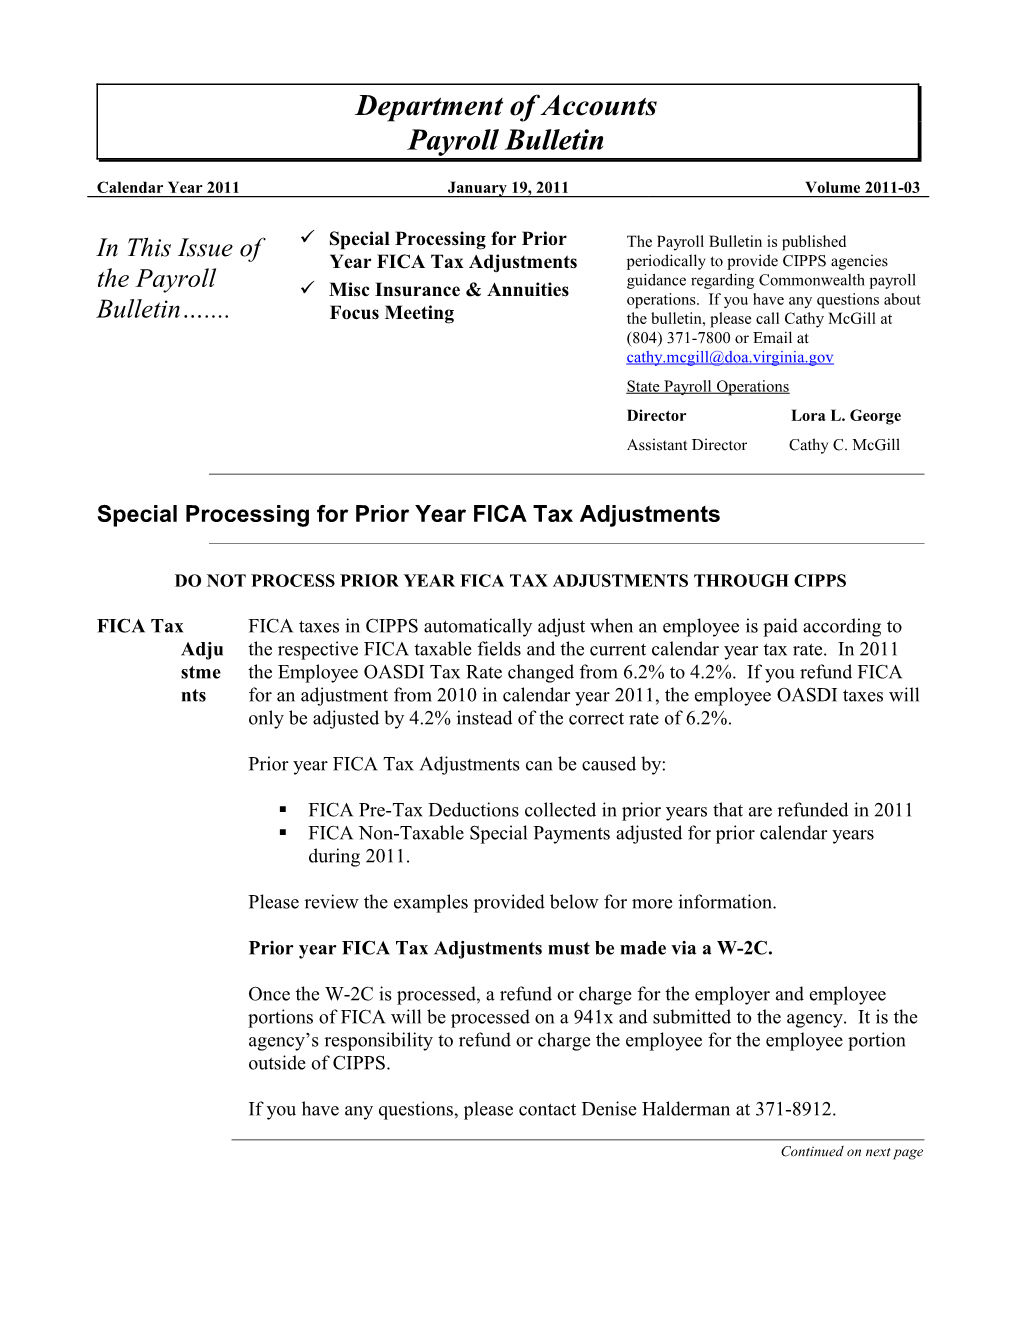 Special Processing for Prior Year Ficatax Adjustments